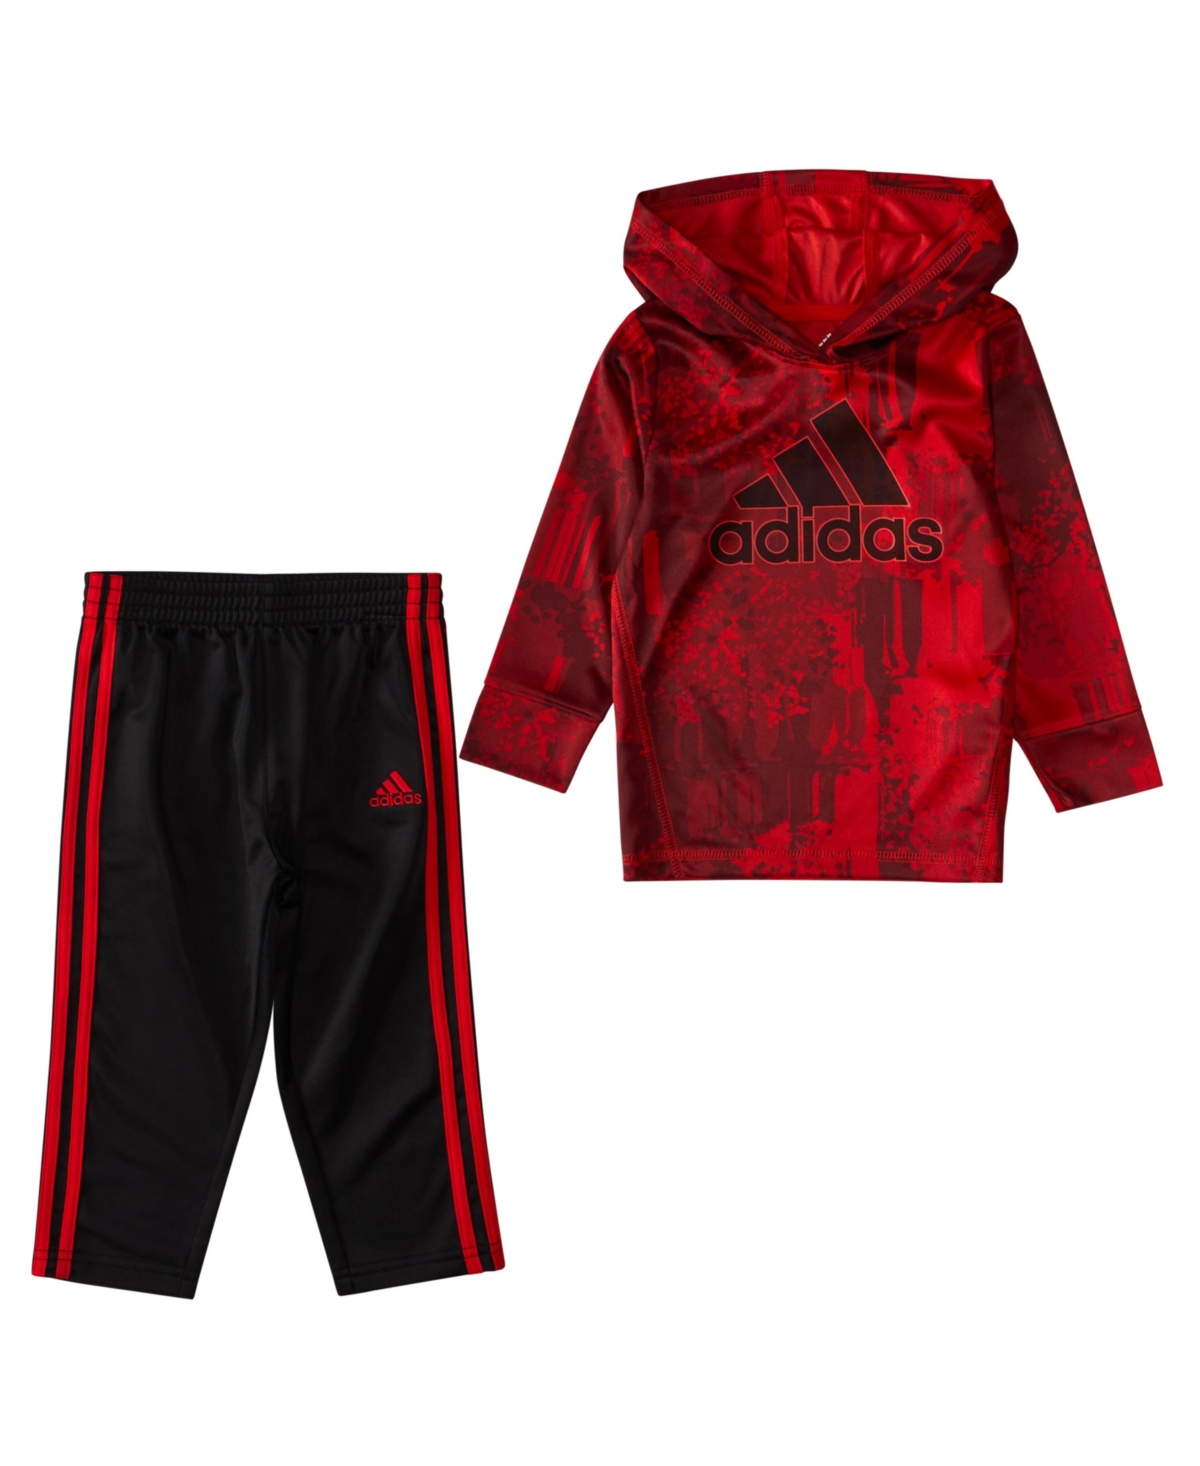 adidas Baby Boys Allover Print Hooded T-shirt and Pants, 2 Piece Set